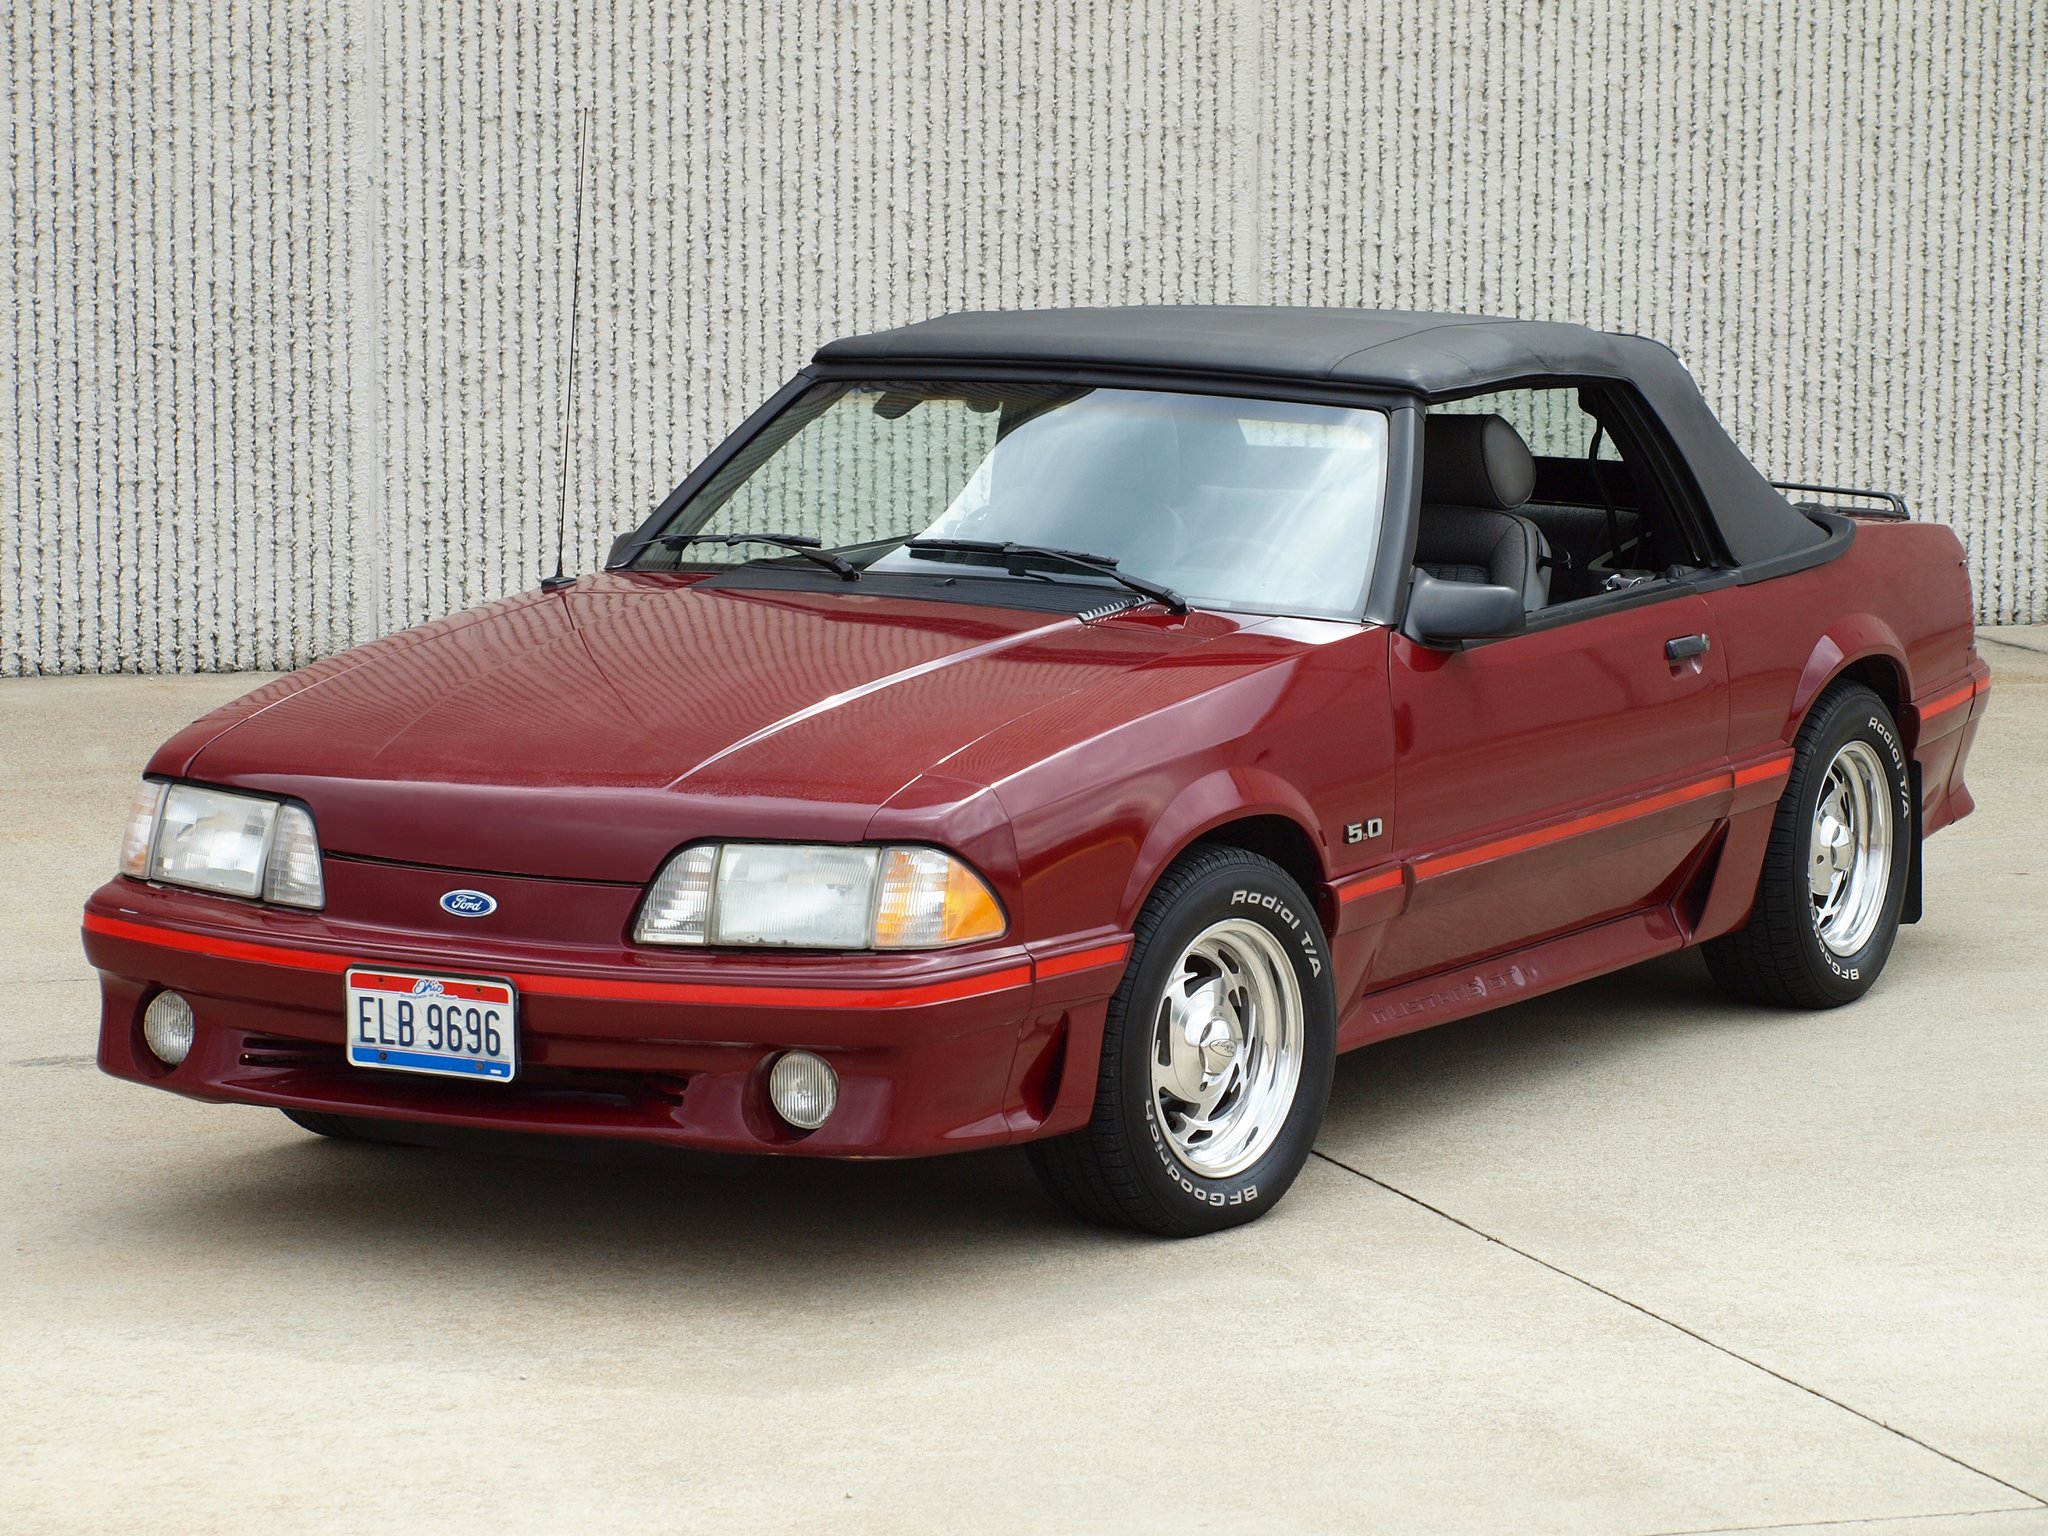 1987 93, Ford, Mustang, G t, Convertible, Muscle Wallpaper